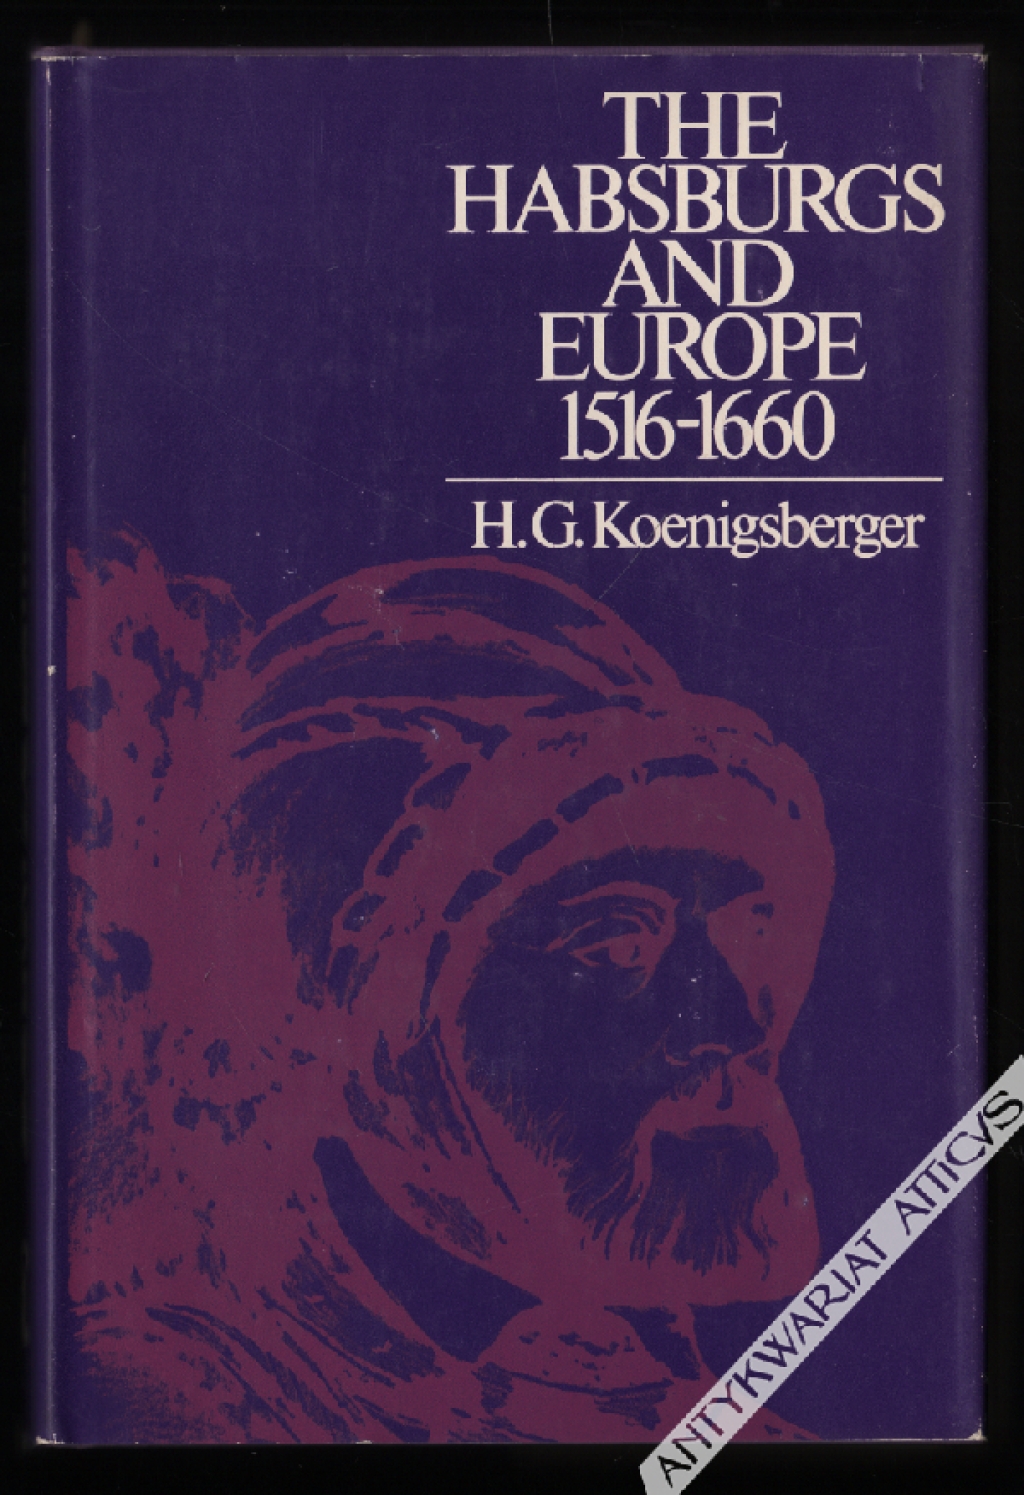 The Habsburgs and Europe 1516-1660